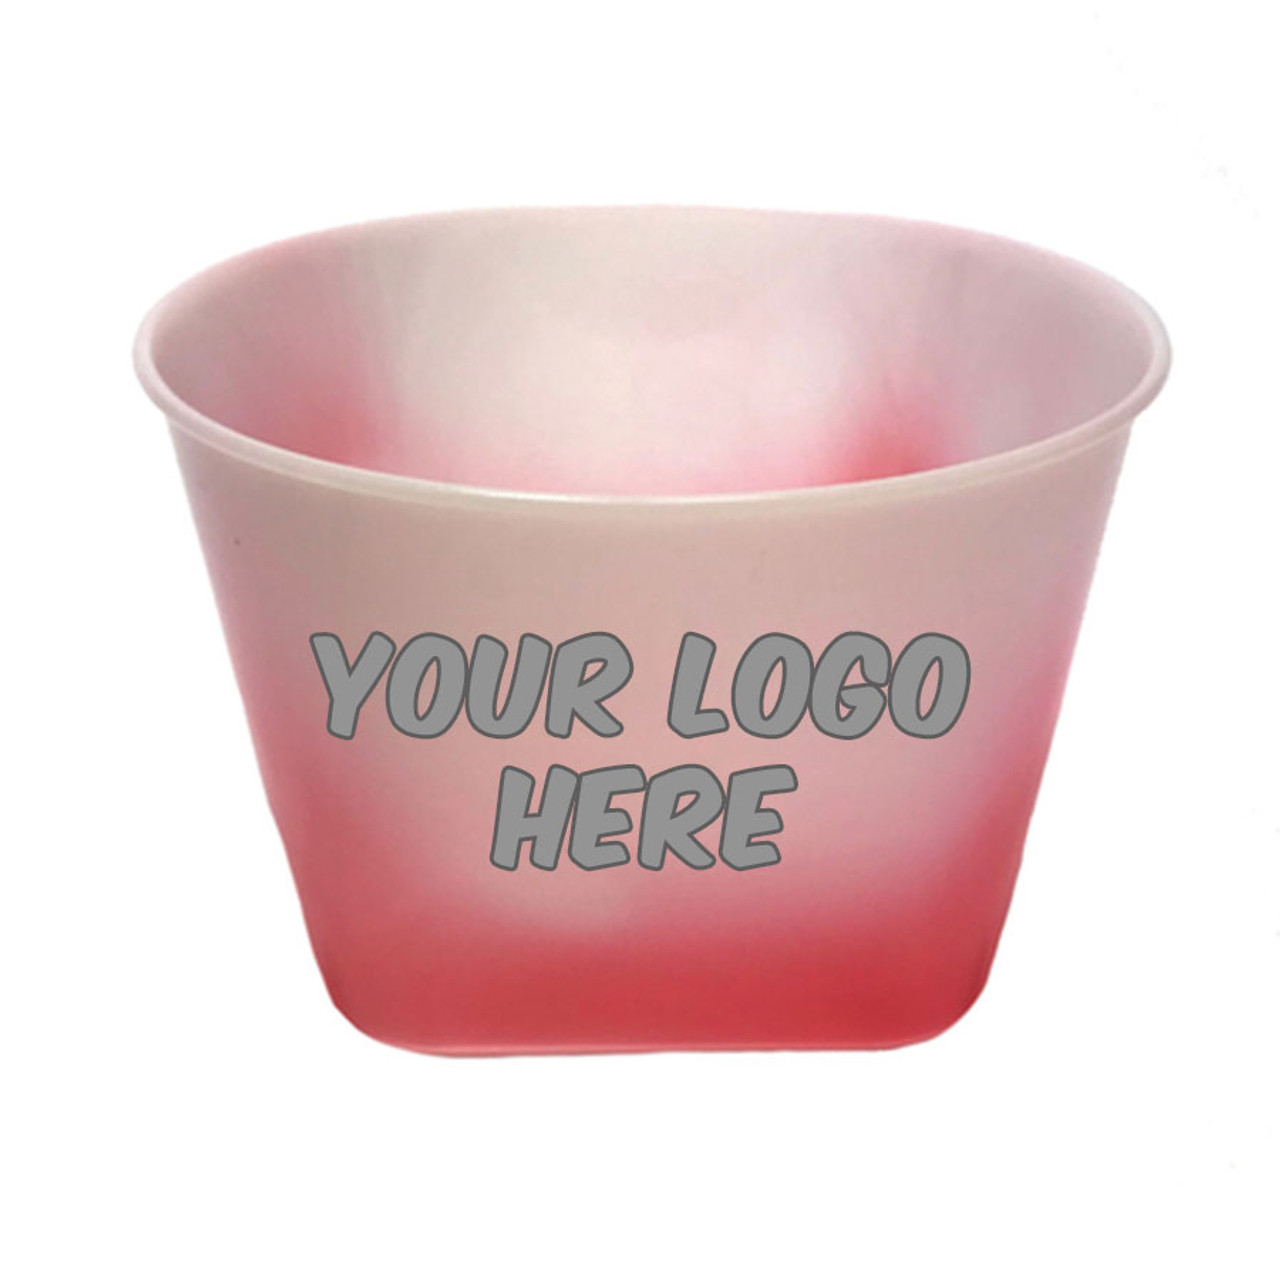 Personalized ice cream bowl with colorful print